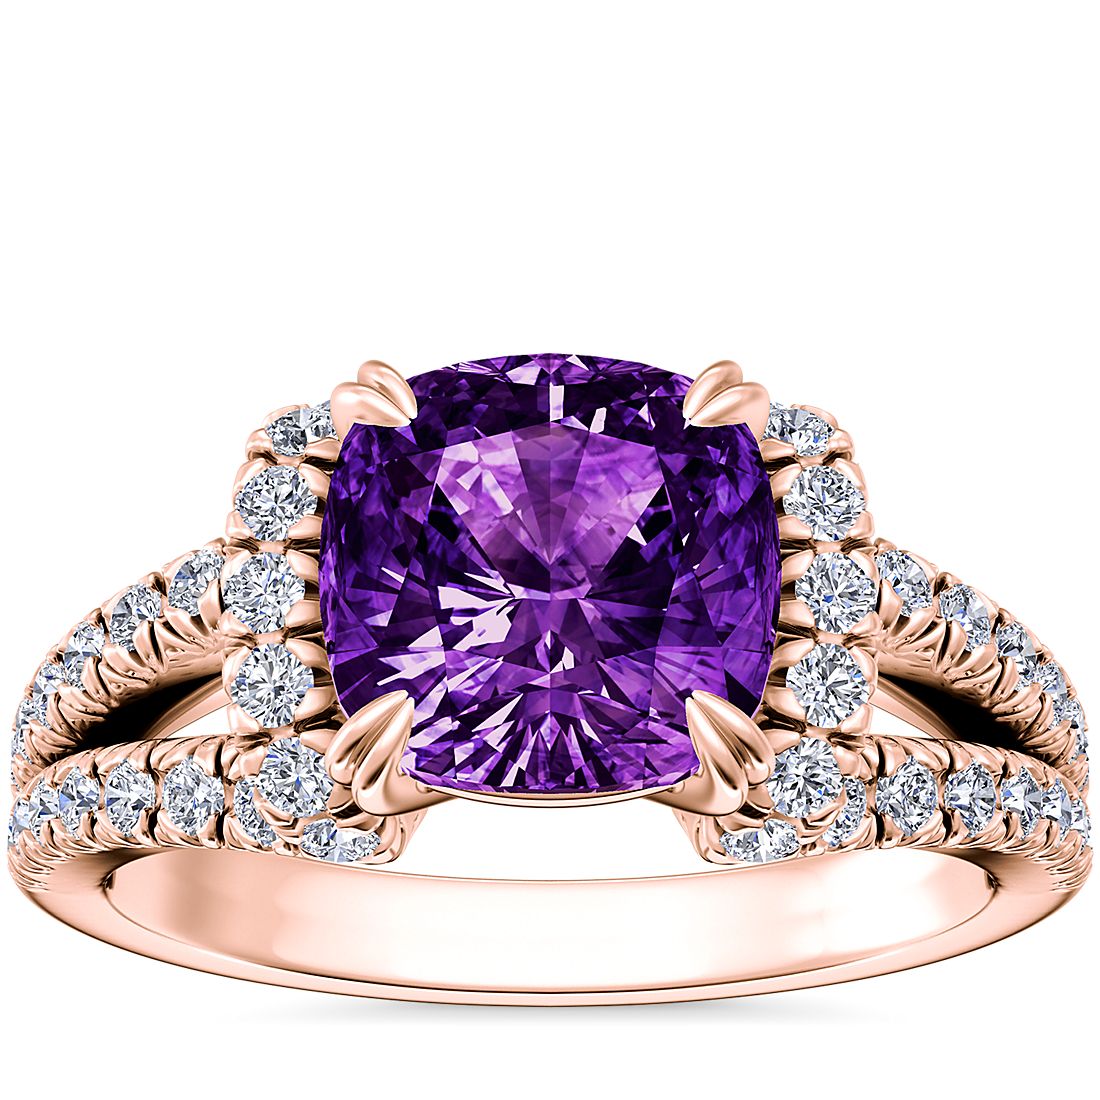 Split Semi Halo Diamond Engagement Ring with Cushion Amethyst in 14k Rose Gold (8mm)